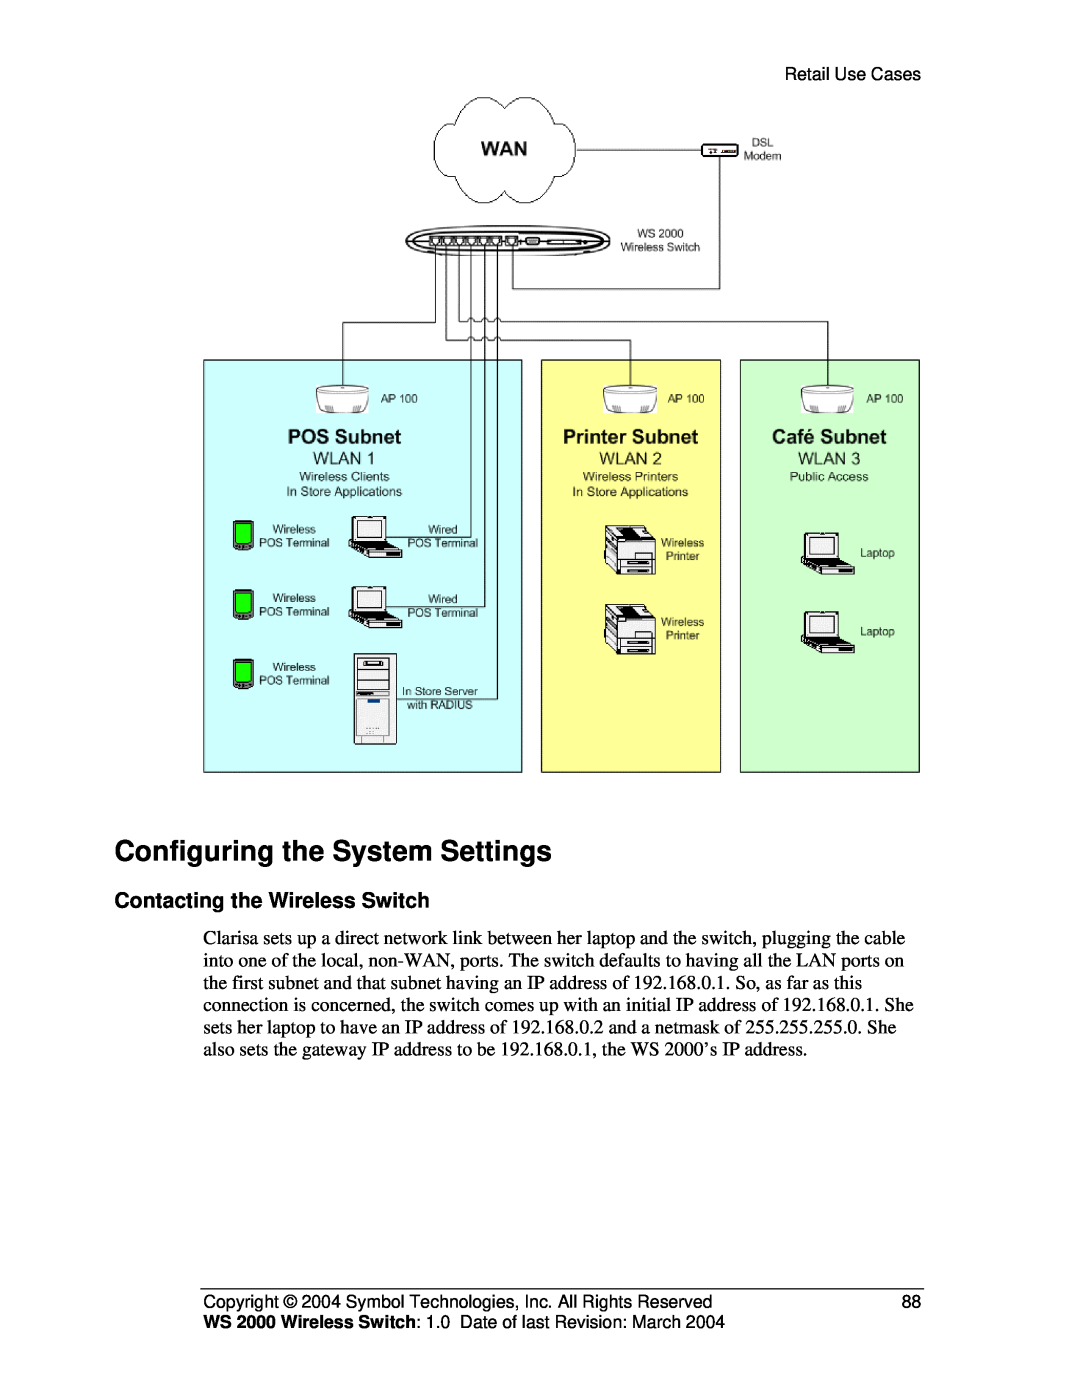 Symbol Technologies WS 2000 manual Configuring the System Settings, Contacting the Wireless Switch 